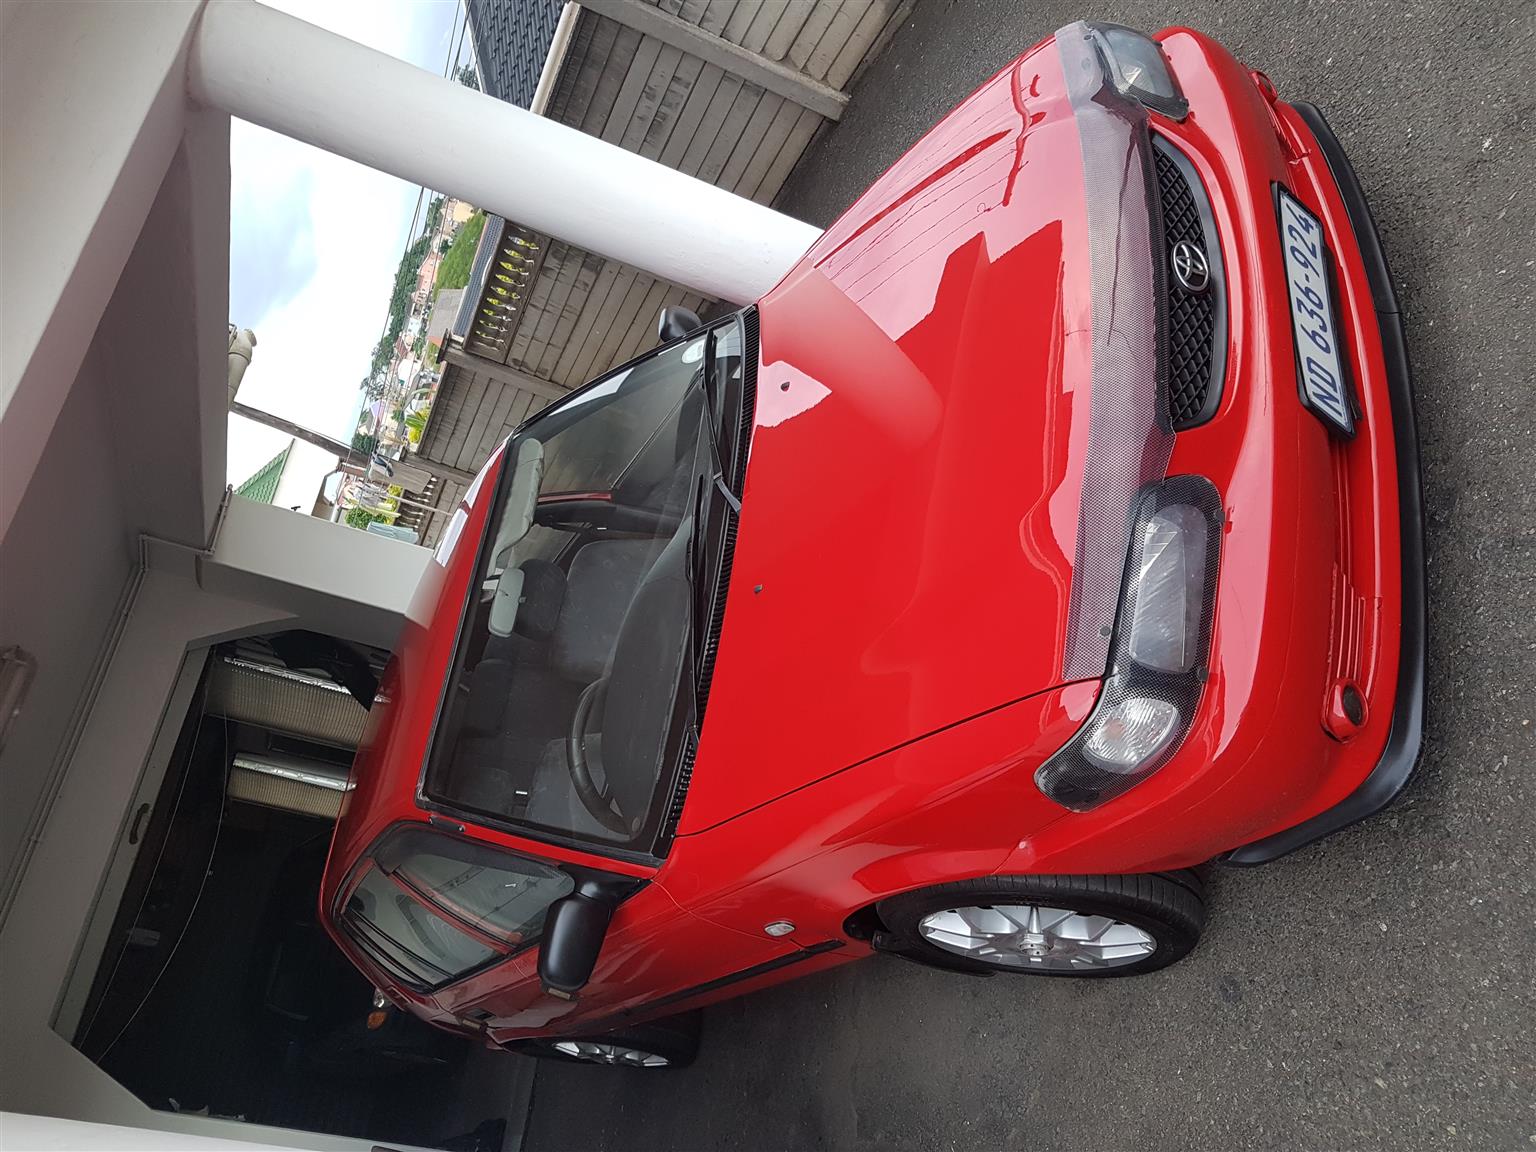 Toyota Tazz 160i for sale